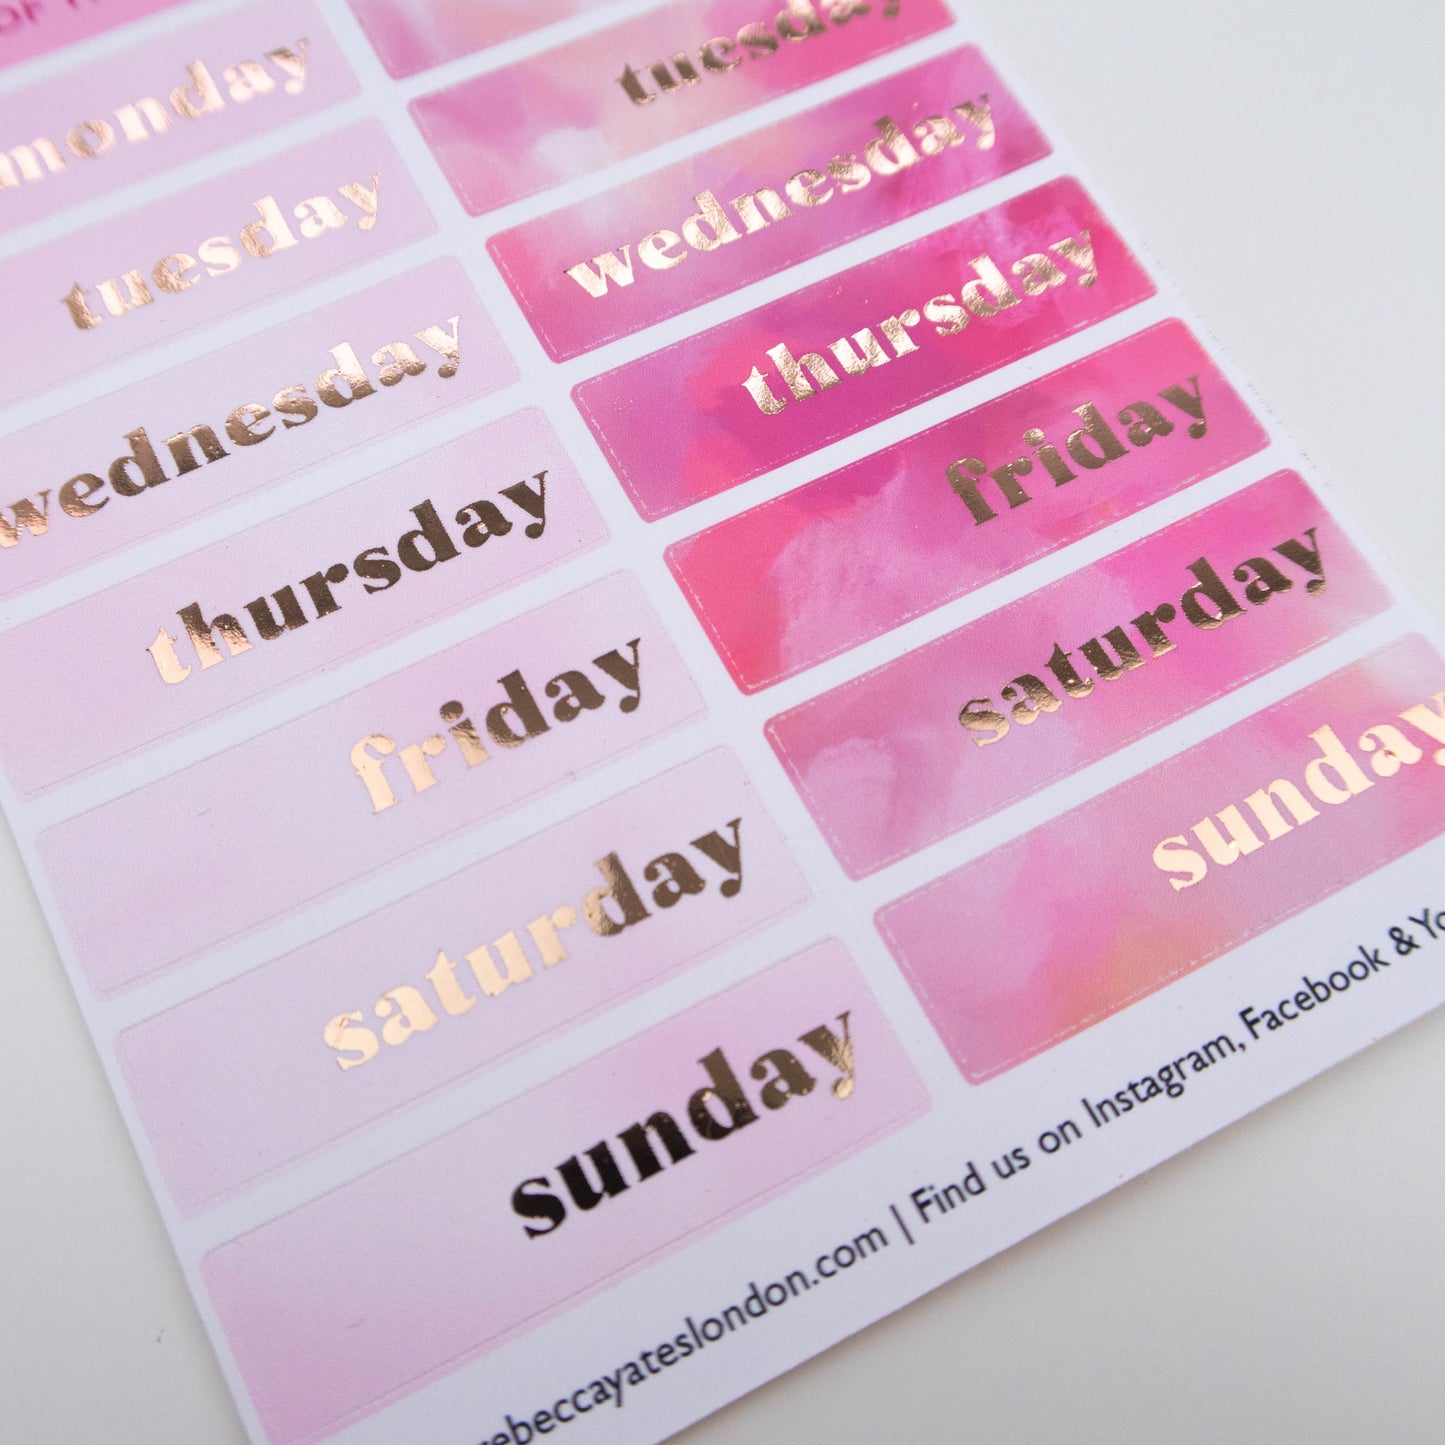 DAYS OF THE WEEK - TAKING MY TIME COLOUR SCHEME